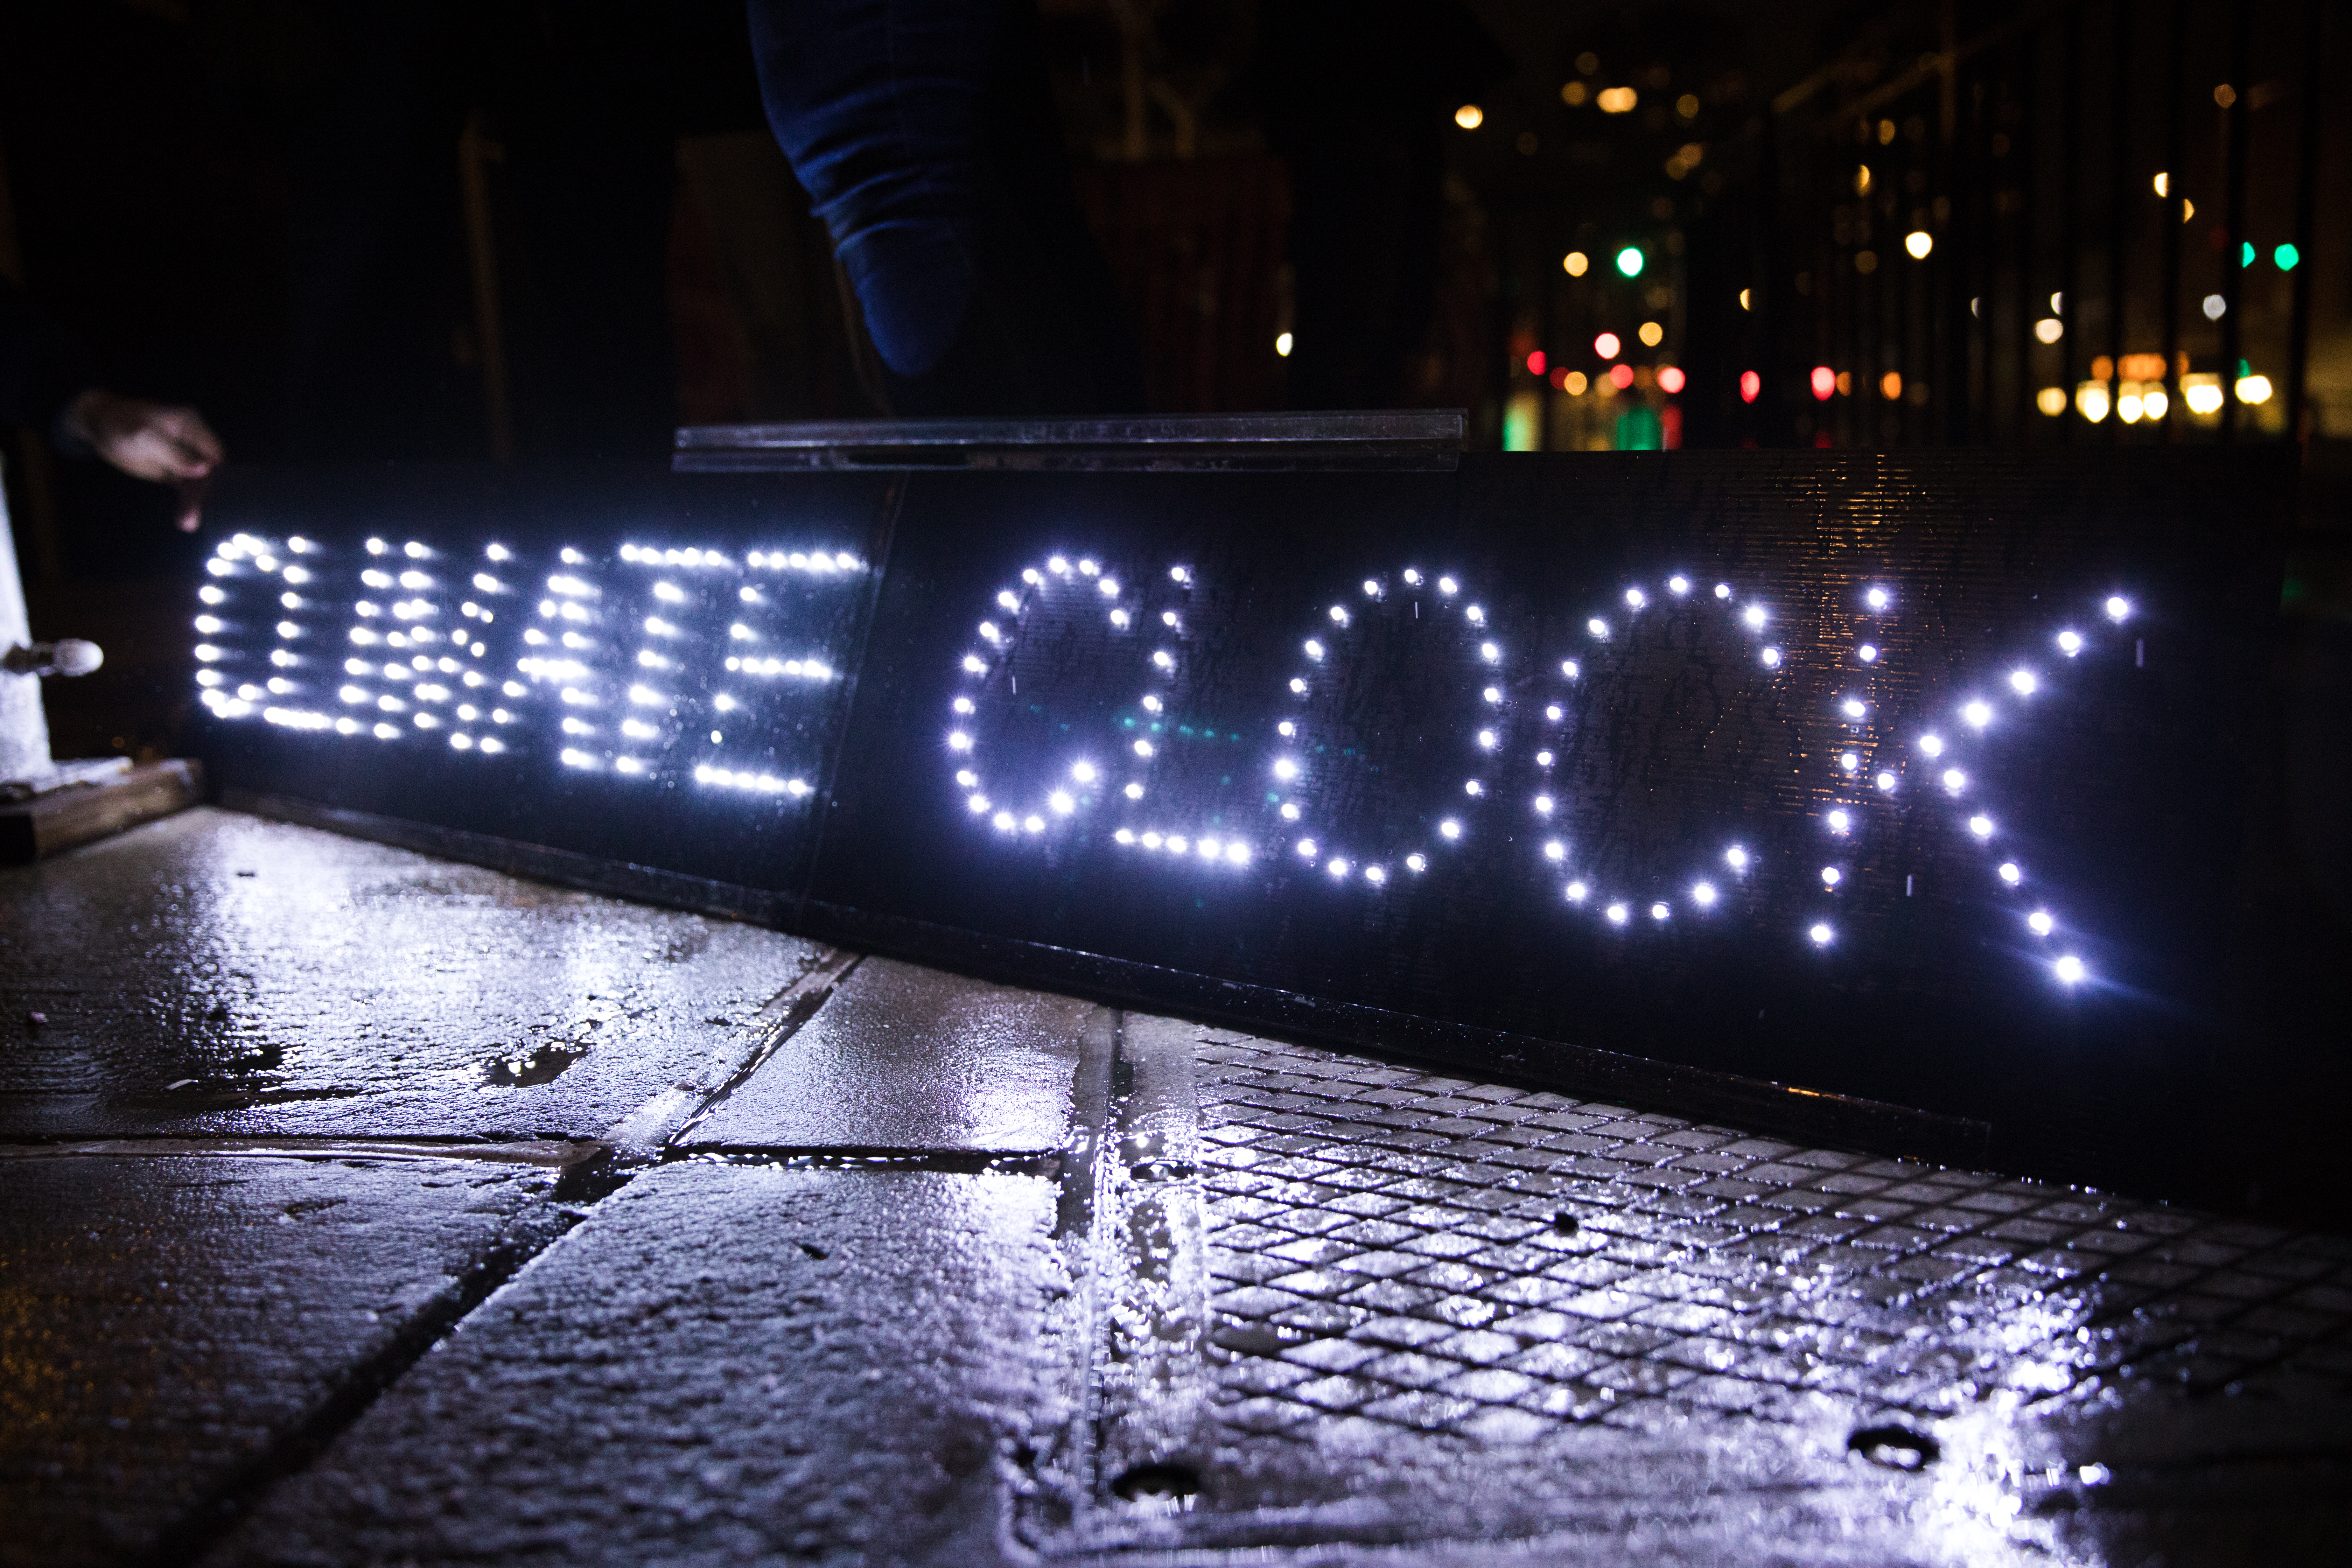 NYC Light Brigade signs have been illuminating messages of protest movements since 2013. Photo: Paul Frangipane/Brooklyn Eagle